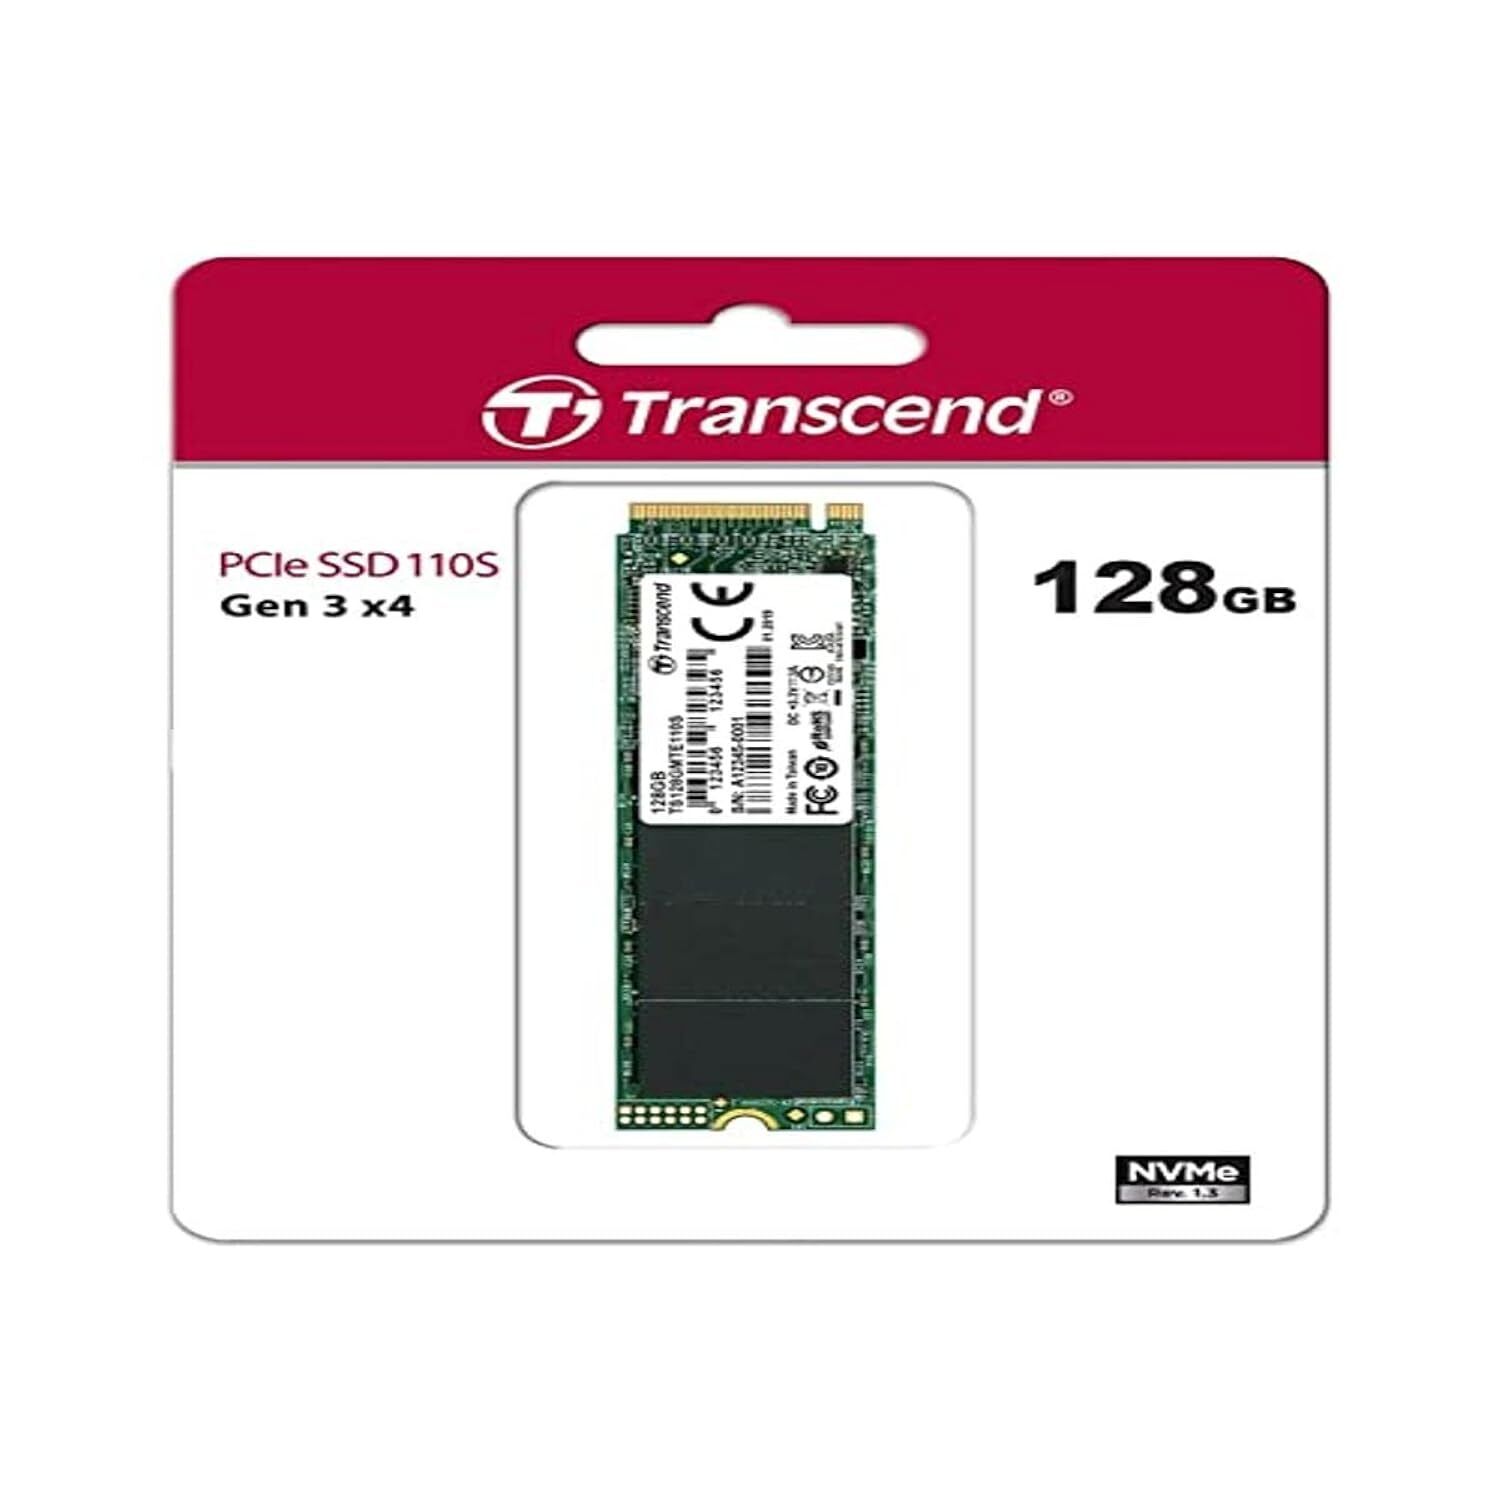 Transcend 128GB Nvme PCIe Gen3 X4 MTE110S M.2 SSD Solid State Drive TS128GMTE1